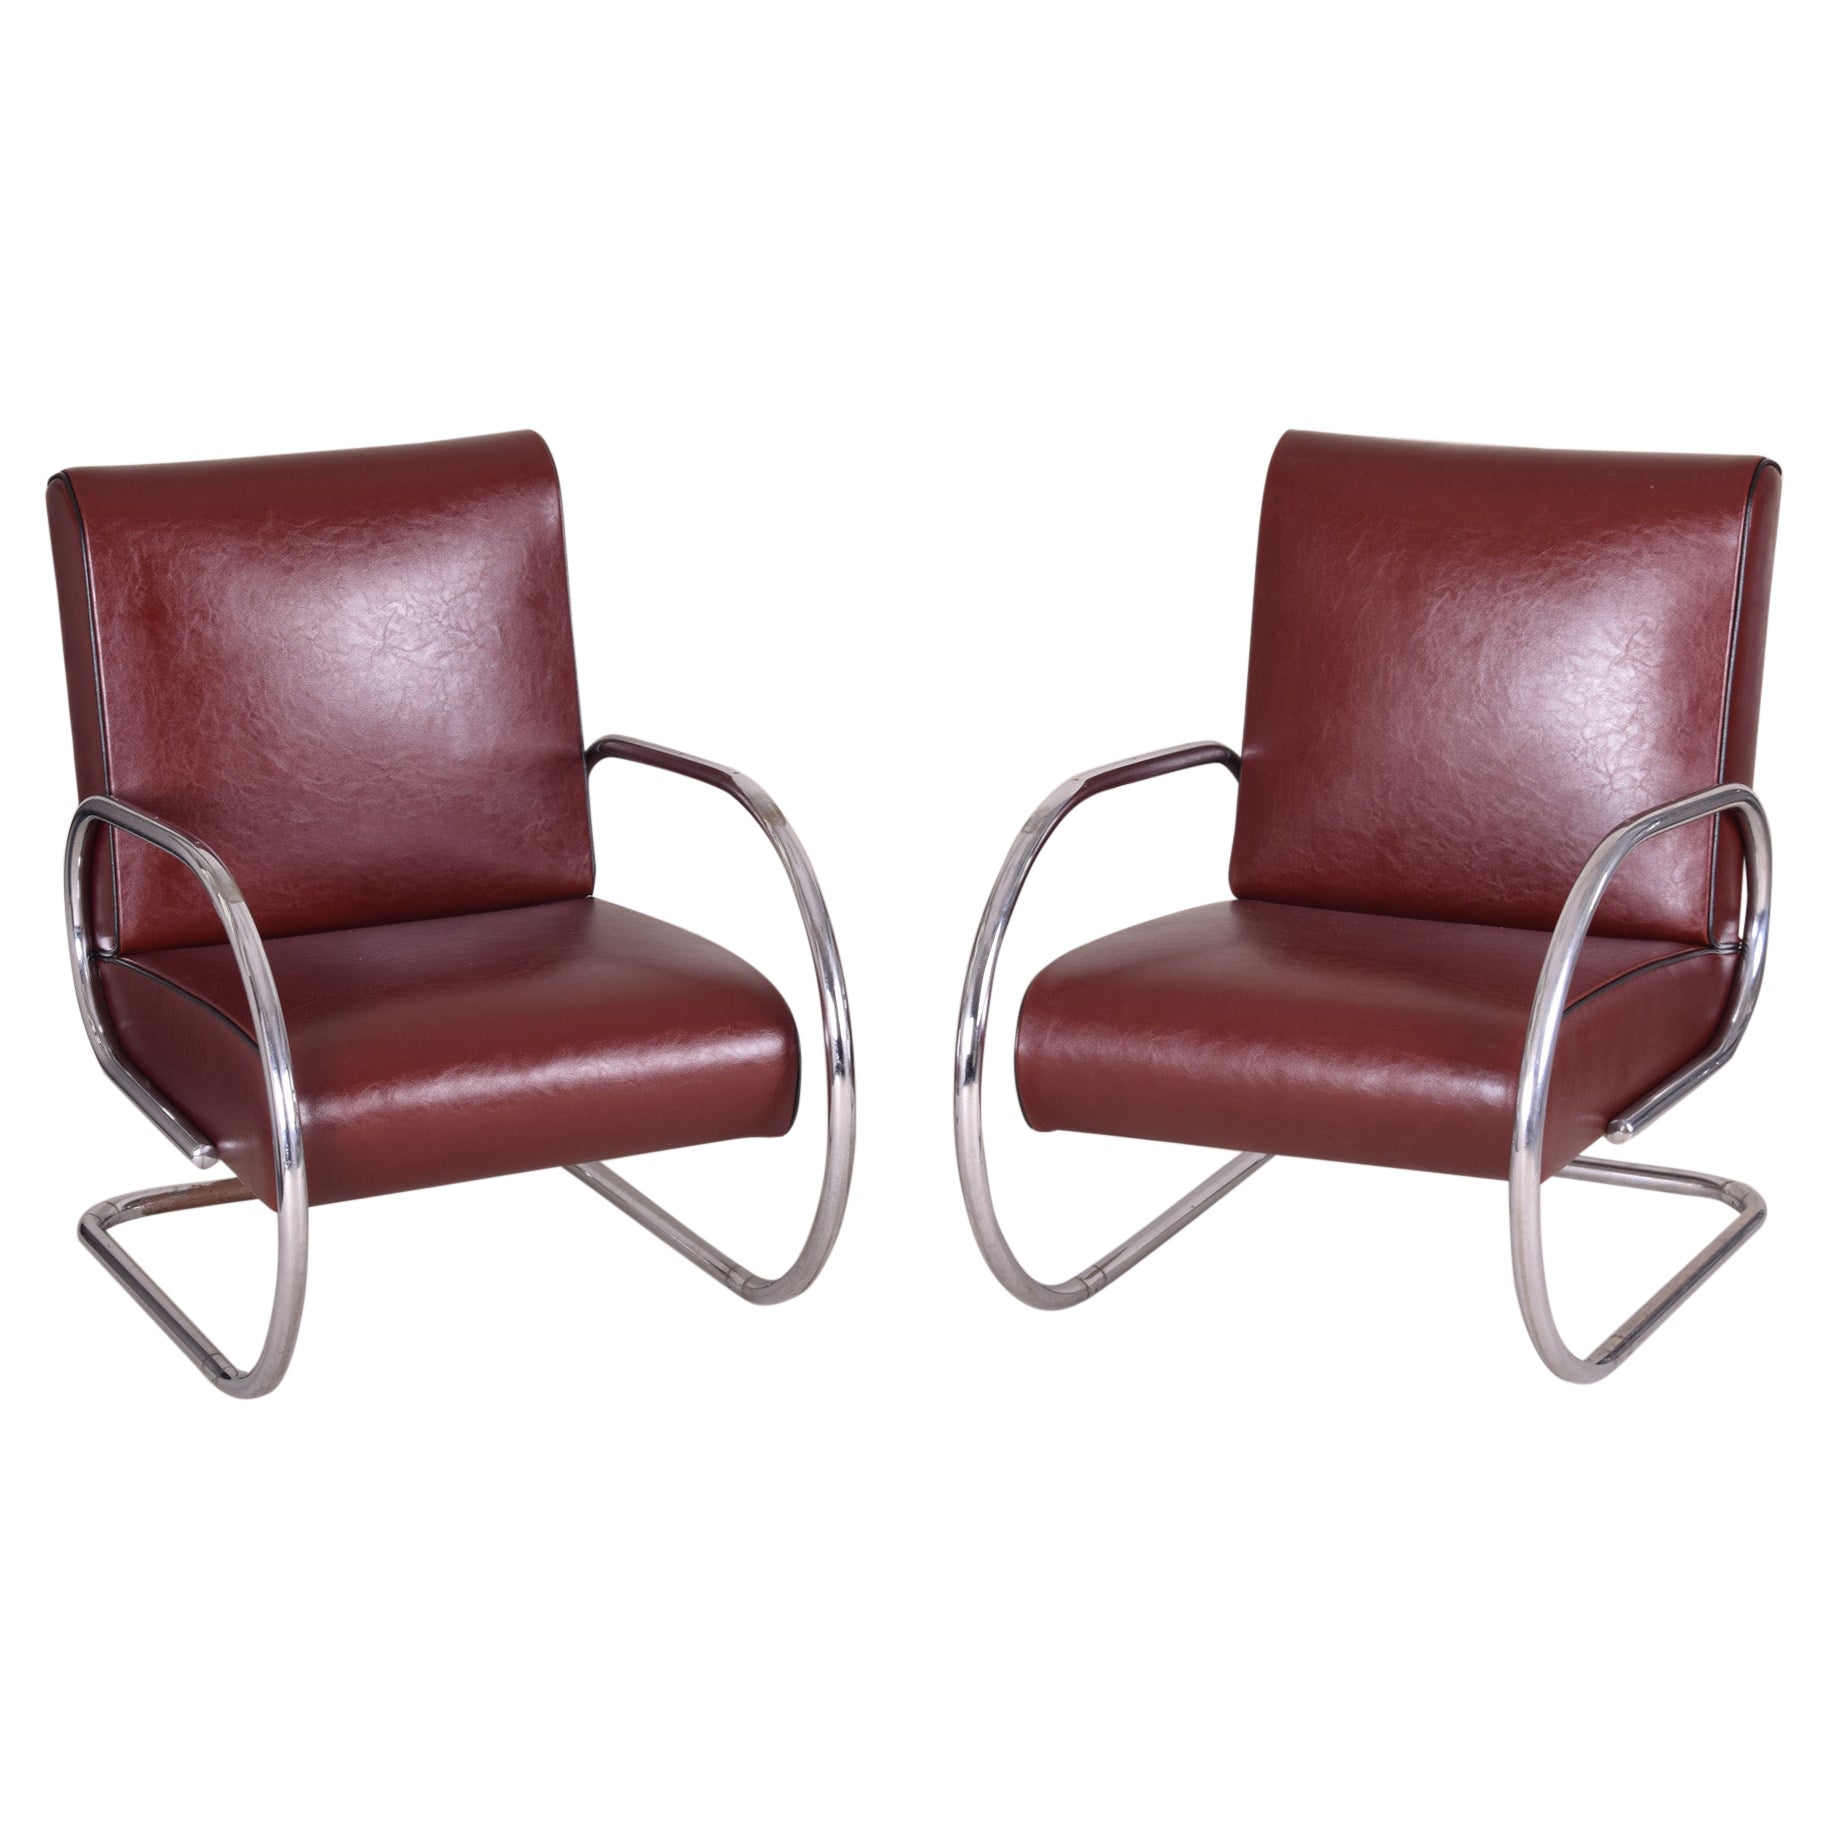 Burgundy Tubular Armchairs, New High Quality Leather Upholstery, 1930s For Sale